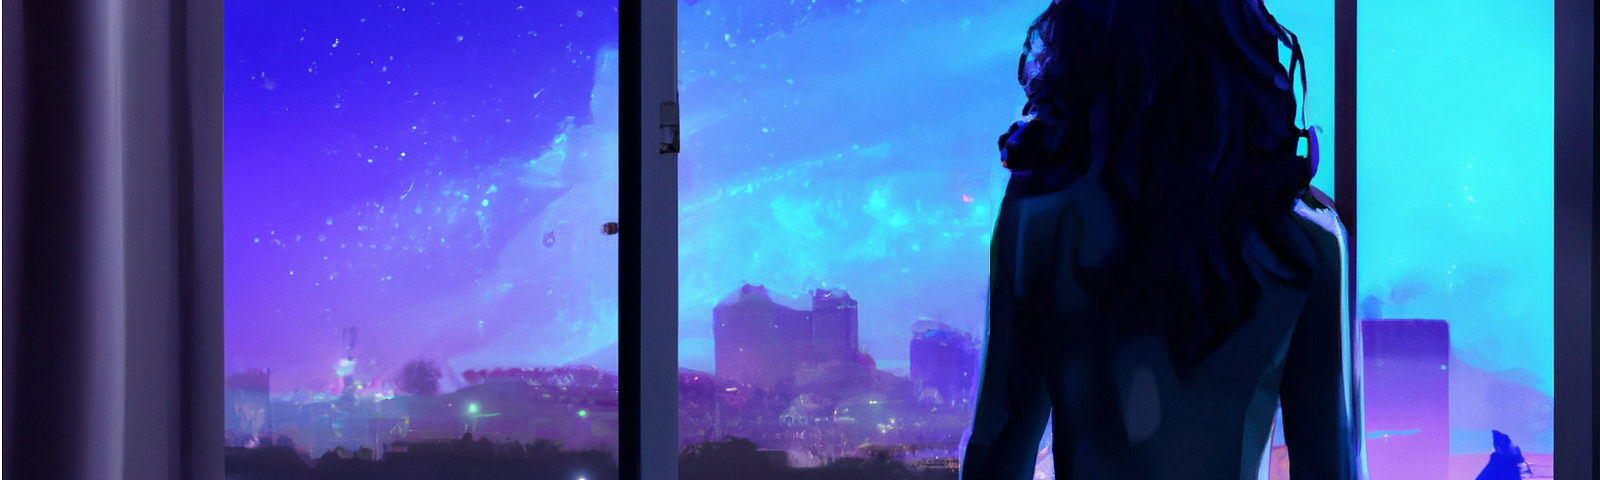 Digital painting of a dark-skinned woman in office clothing and with long black hair with her back turned to the camera as she’s looking through a window at a view of a night-time city.